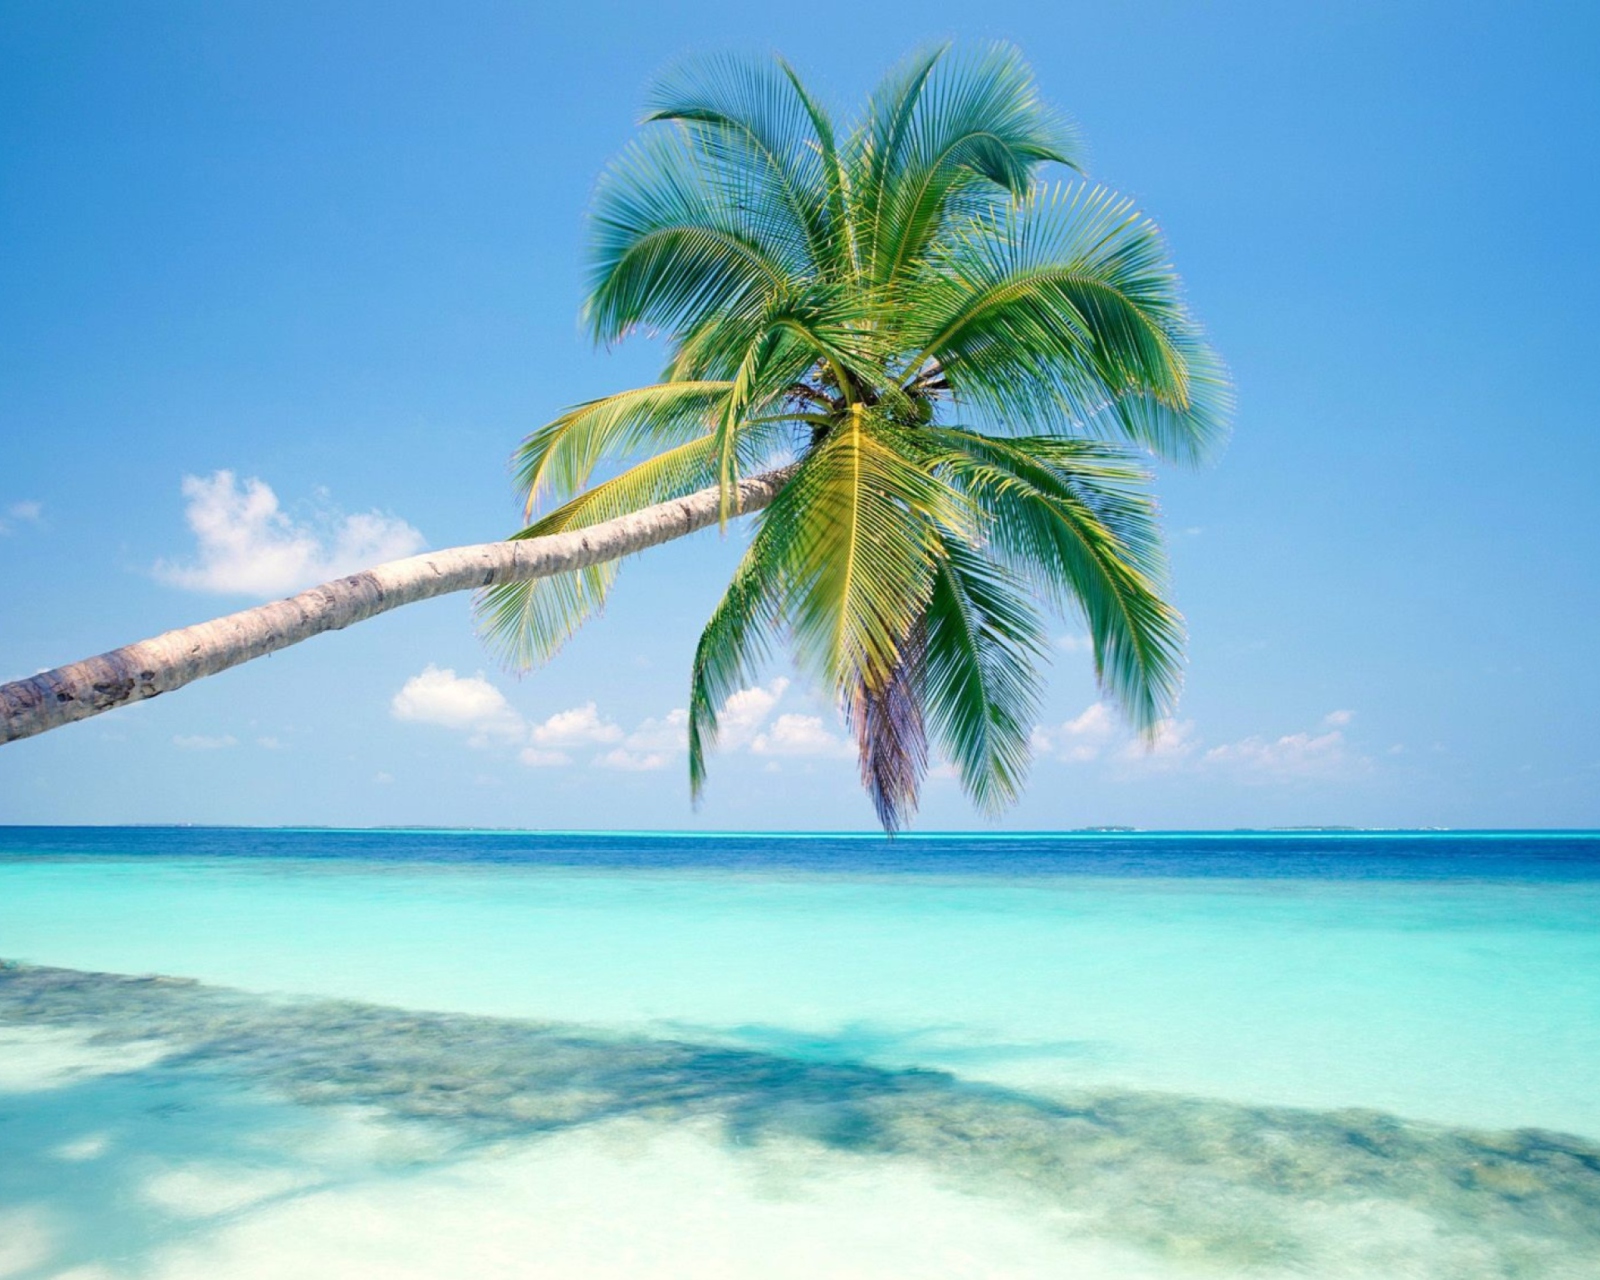 Blue Shore And Palm Tree wallpaper 1600x1280